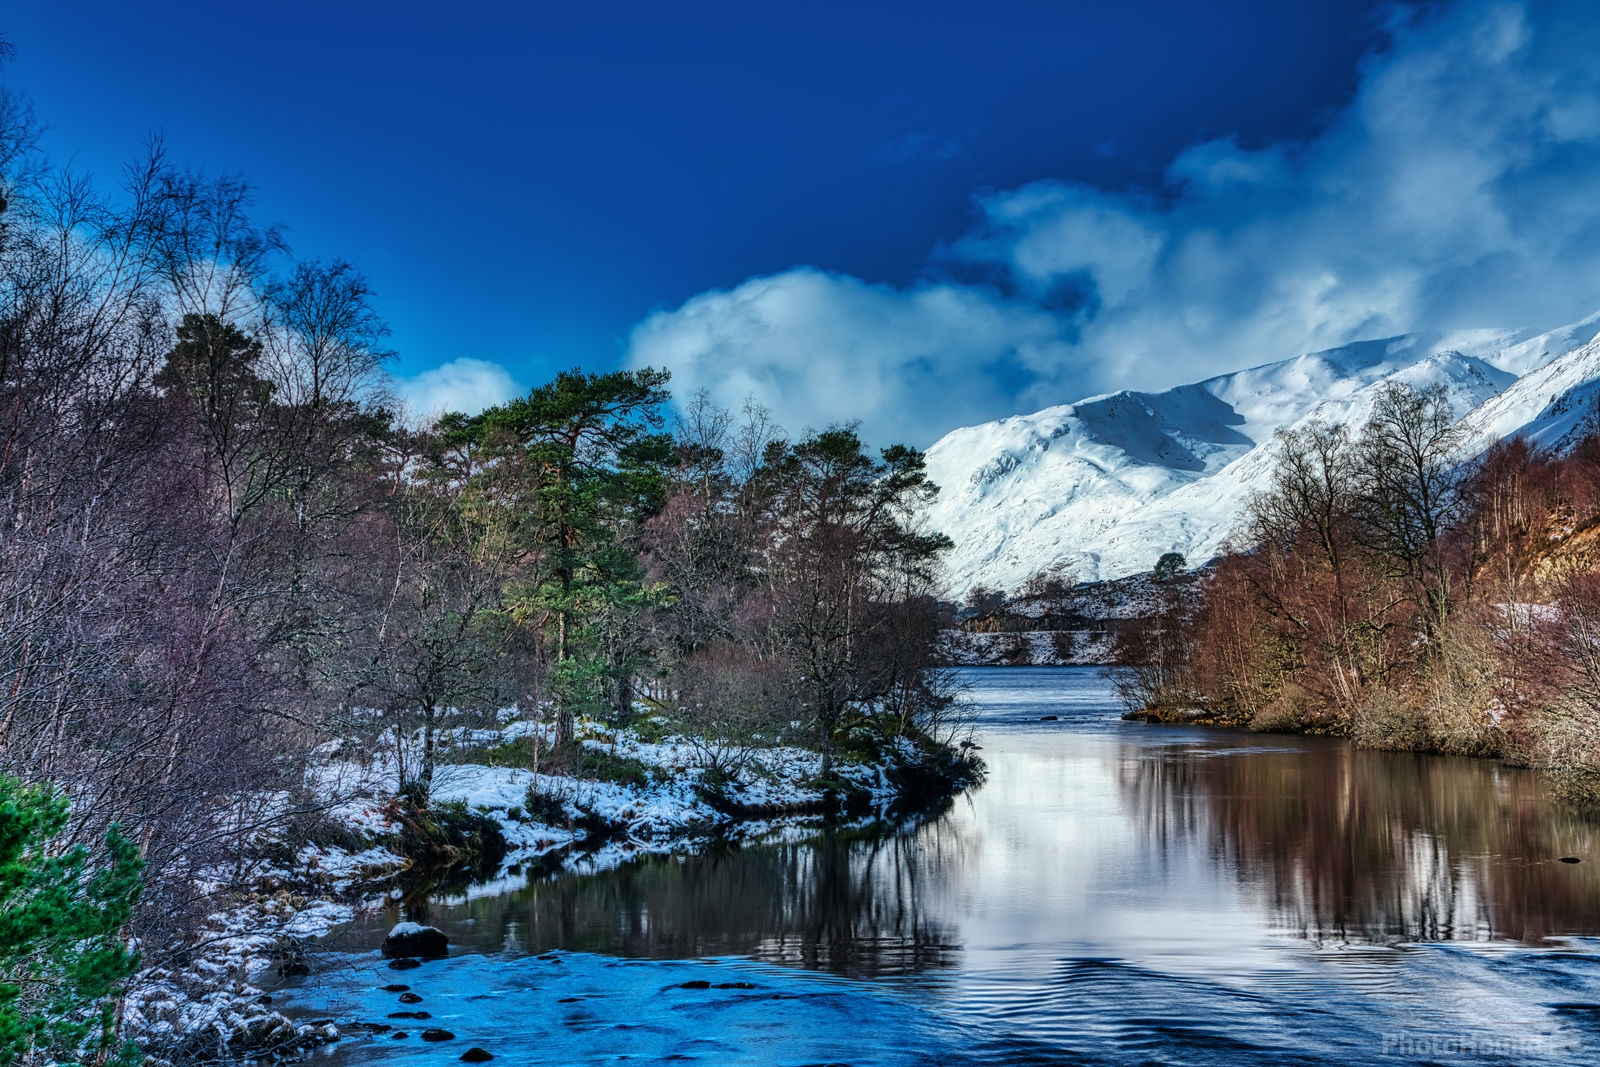 Image of Loch Affric by Peter Zalabai